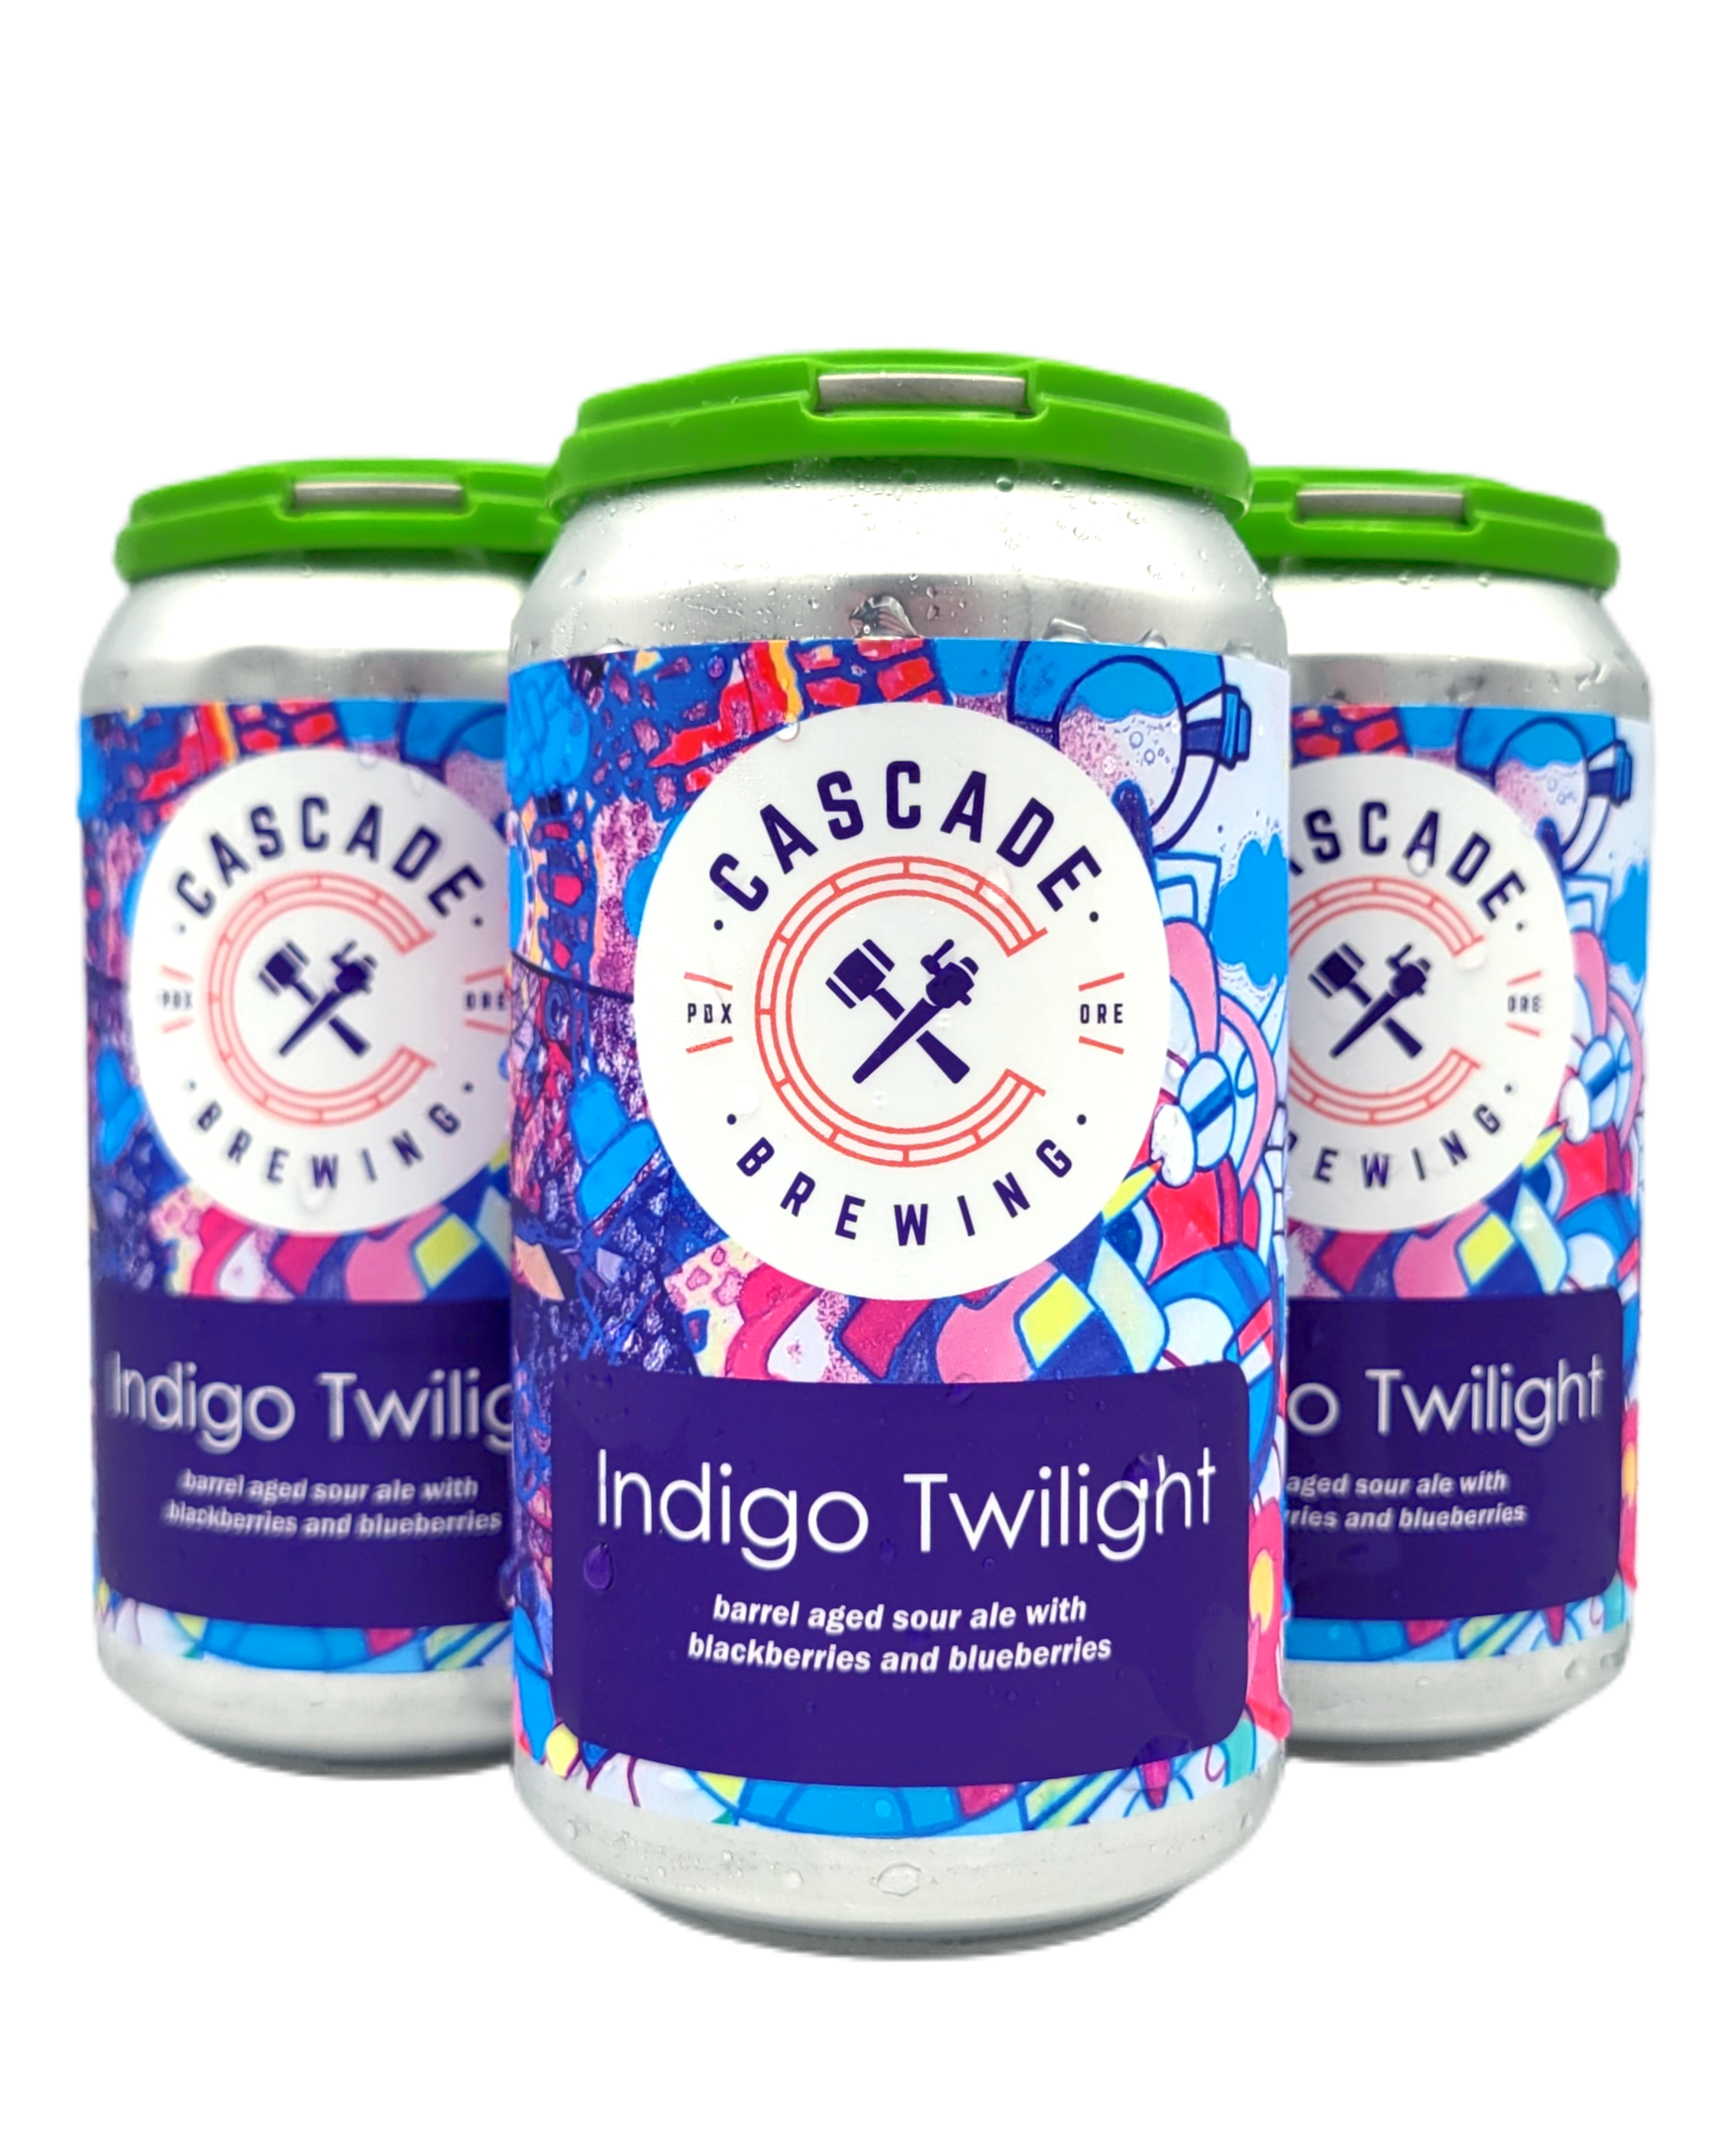 Cascade Brewing Releases Indigo Twilight & One Way Or Another